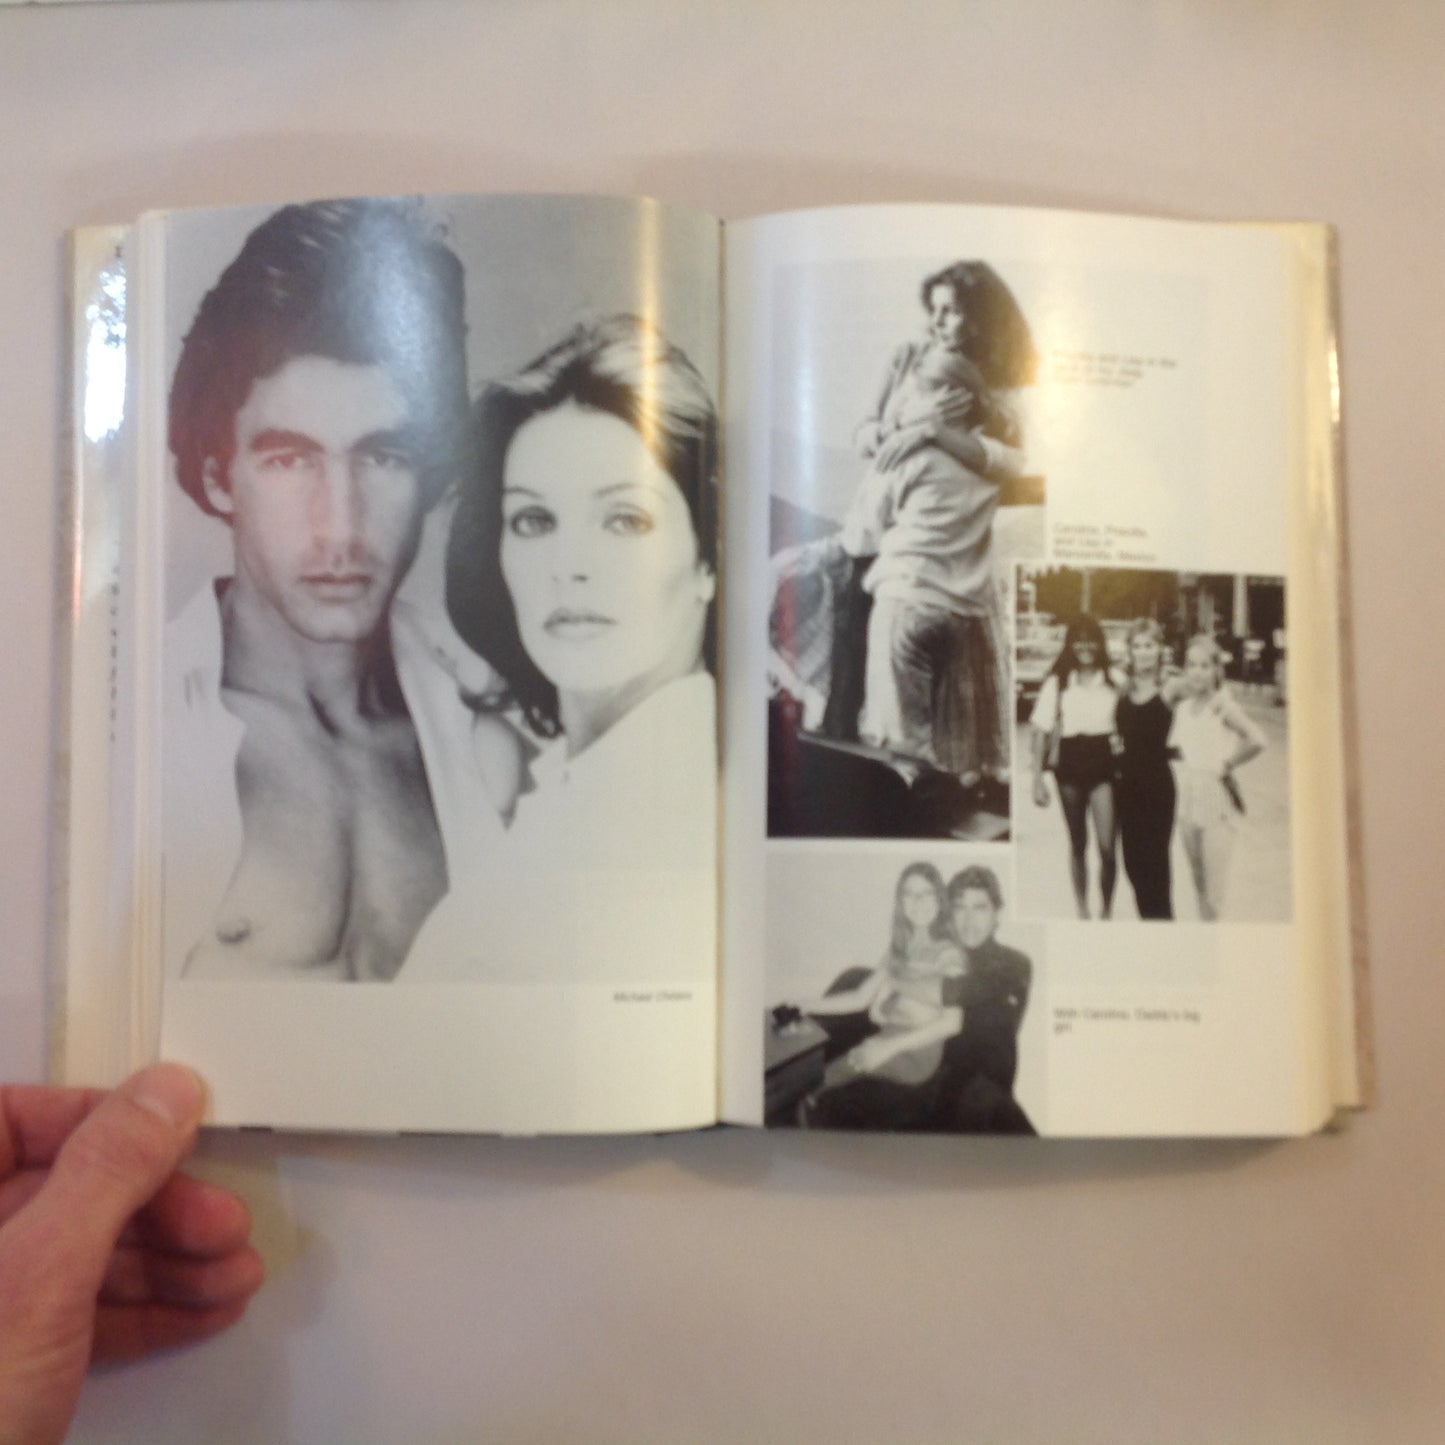 Vintage 1988 HCDJ Priscilla, Elvis and Me: In the Shadow of the King Michael Edwards First Edition